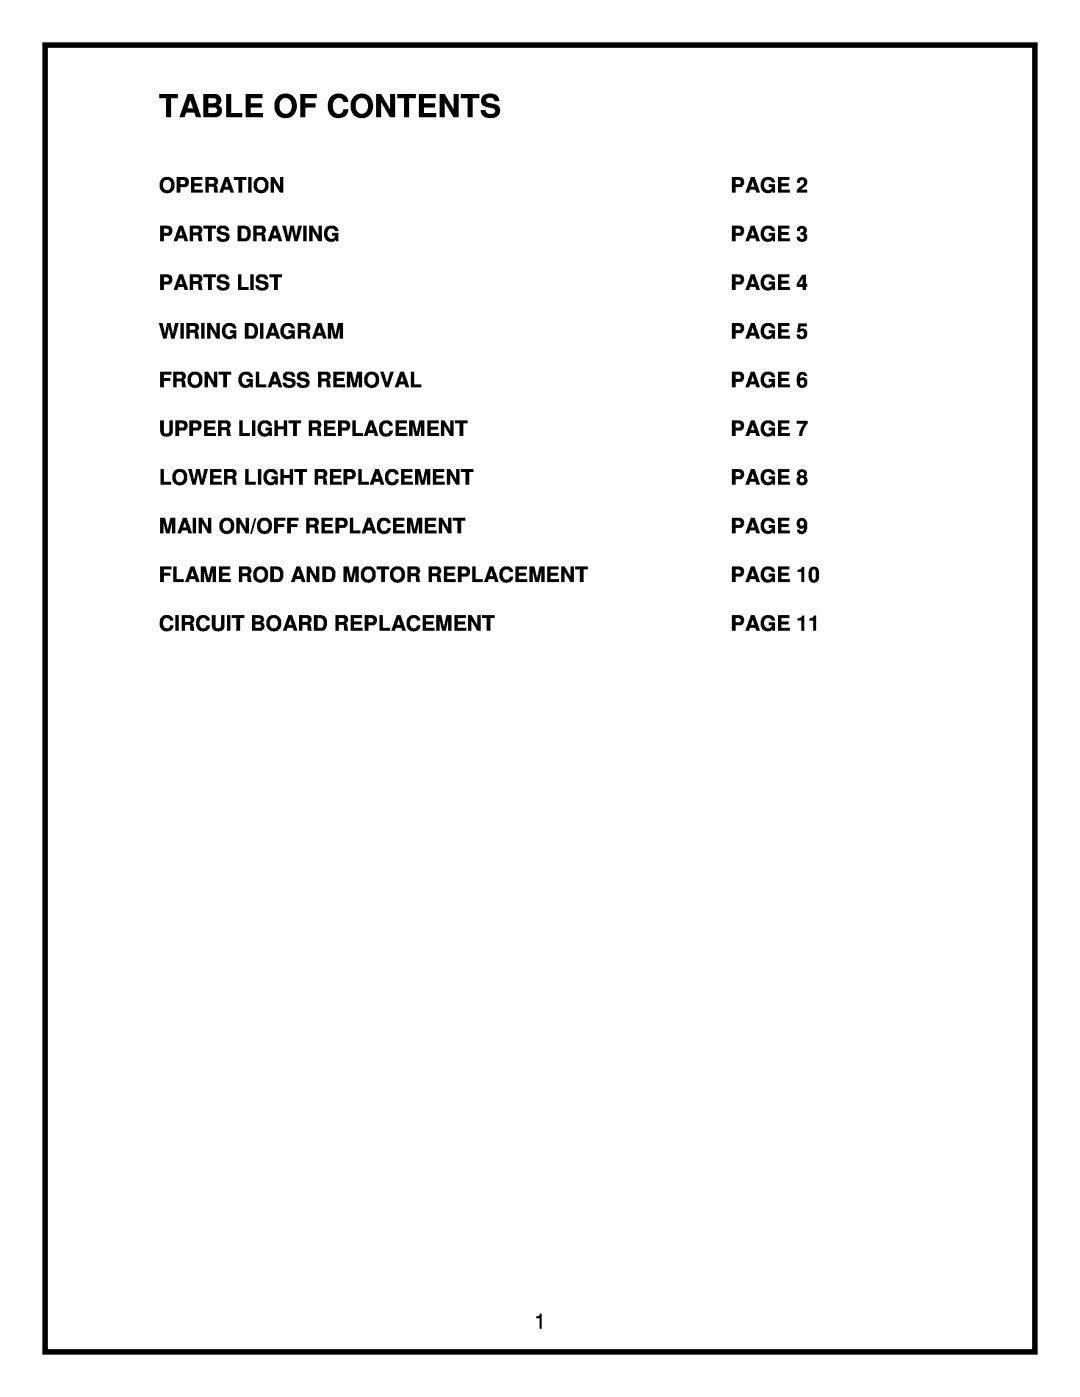 Dimplex DFO2307 service manual Table Of Contents 